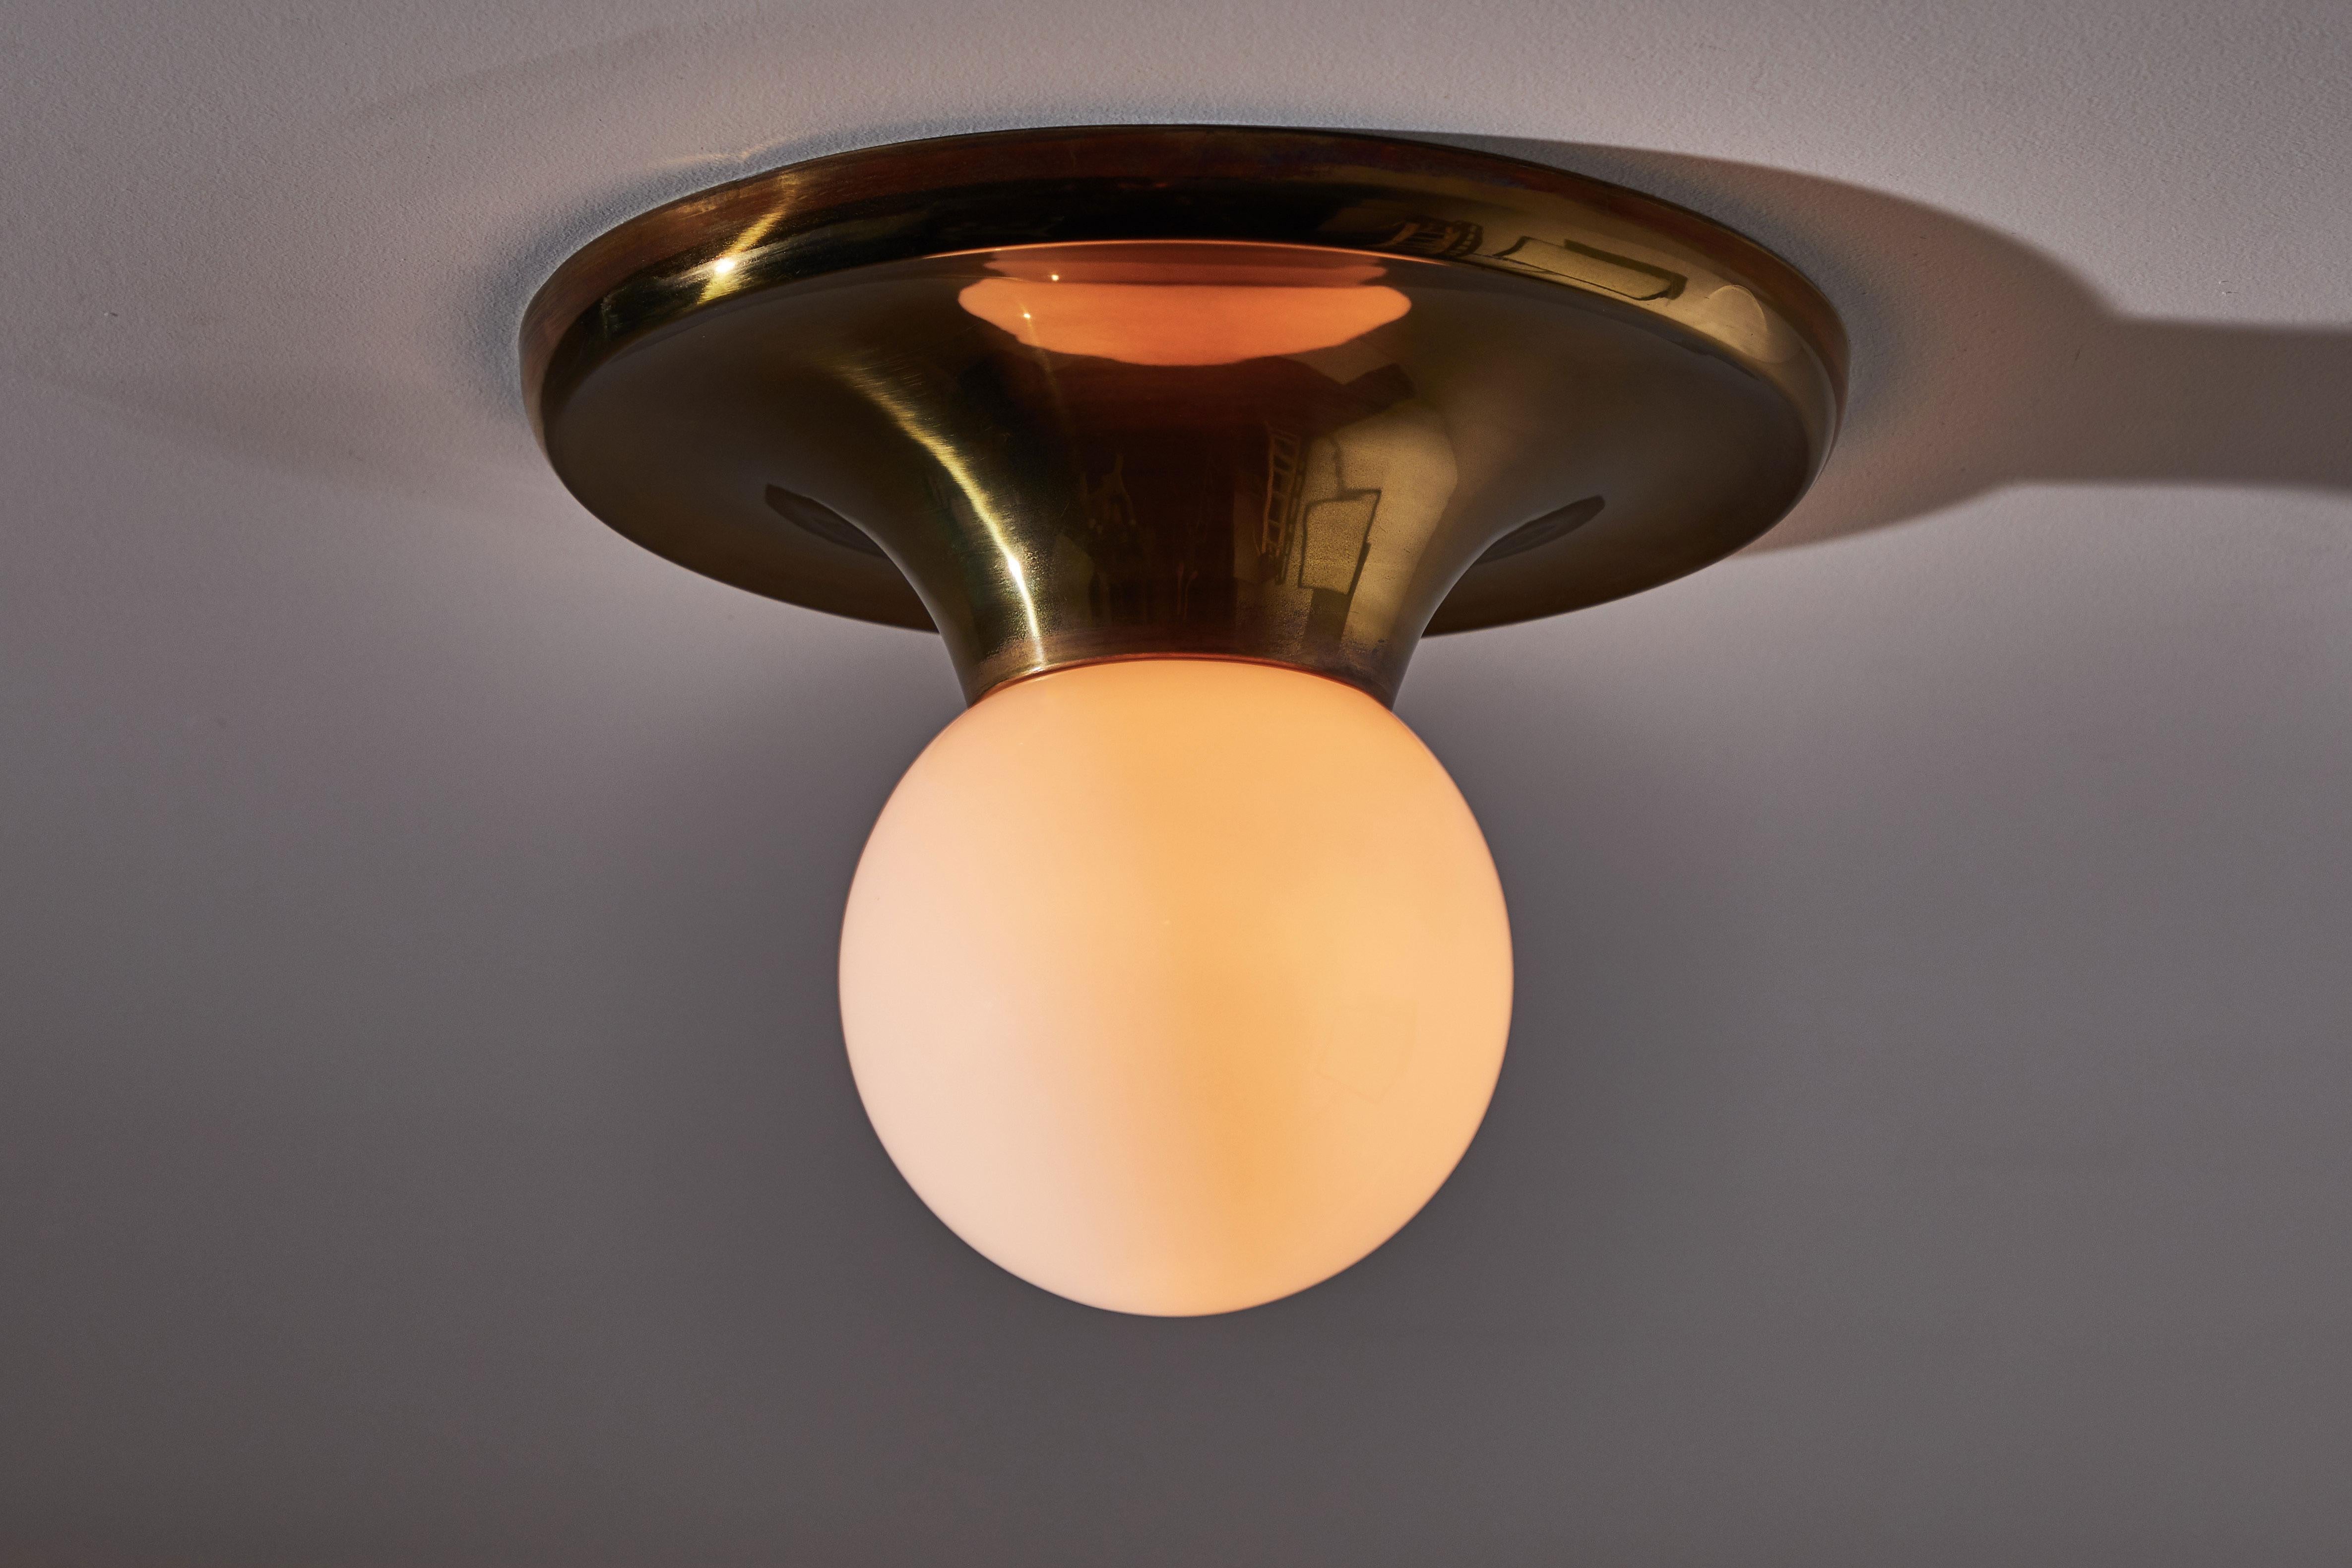 Single flush mount ceiling light by Achille & Pier Giacomo Castiglioni for Flos. Designed and manufactured in Italy, 1965. Brass and opaline glass. Rewired for US junction boxes. Each light takes one E27 100w maximum bulb. Literature: Casa Amica